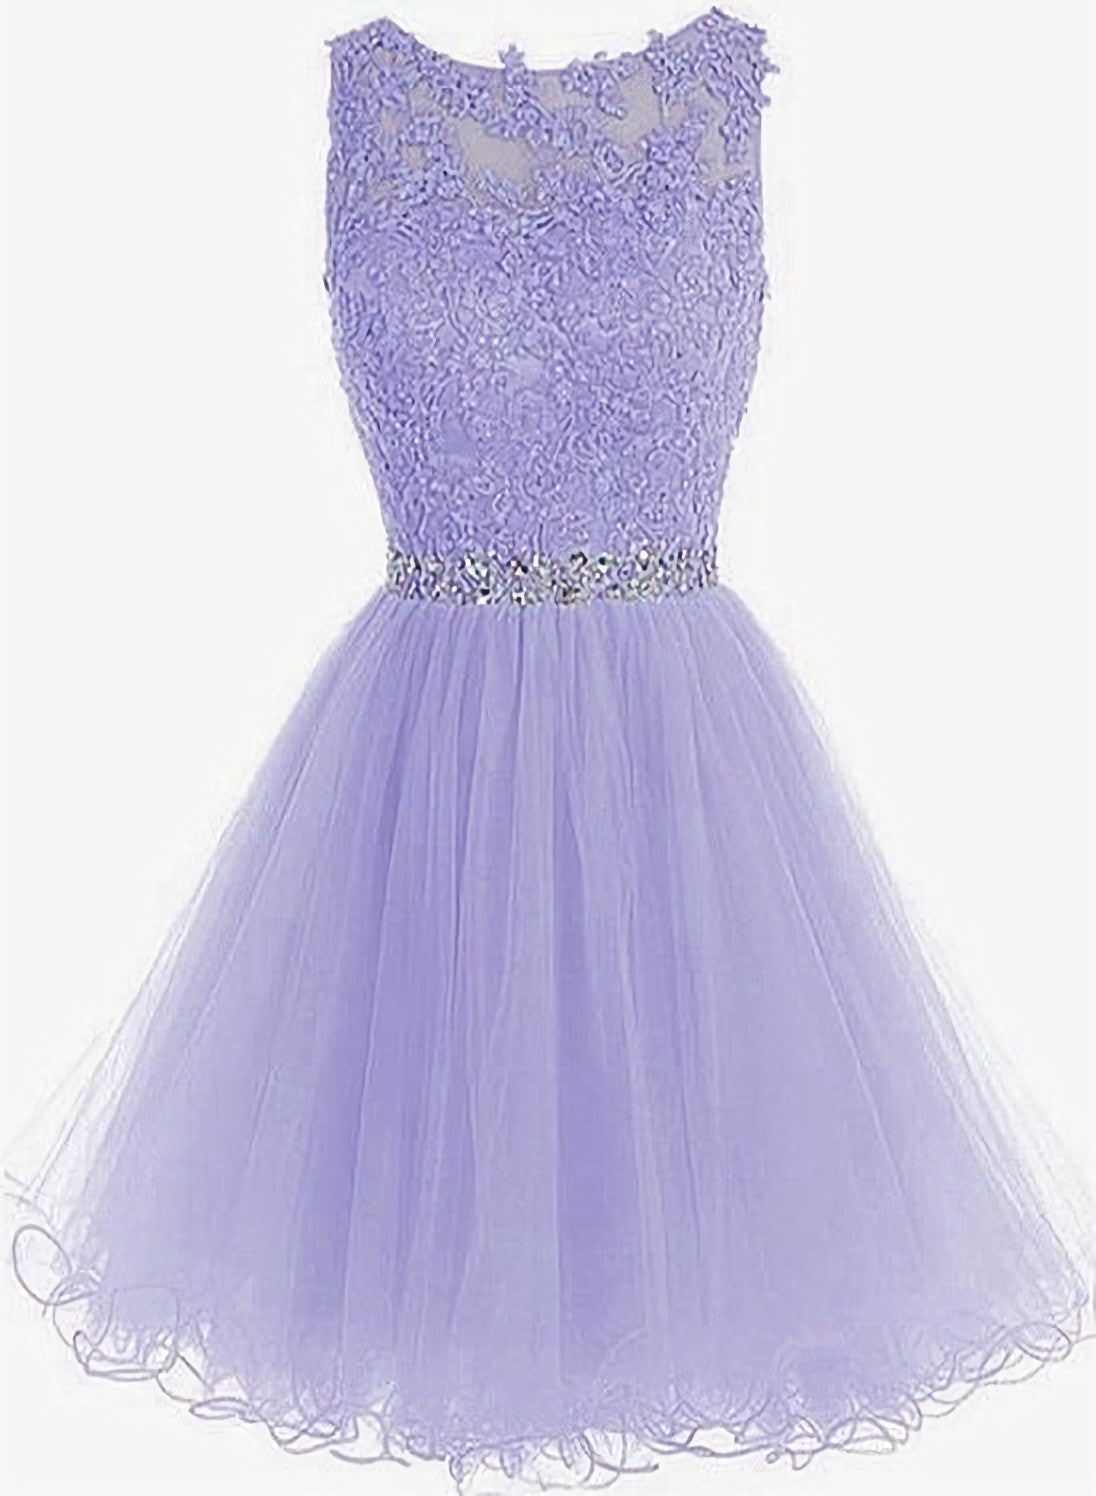 Party Fitness, Cute Round Neck Lace Short Purple Prom Dresses, Purple Homecoming Dresses